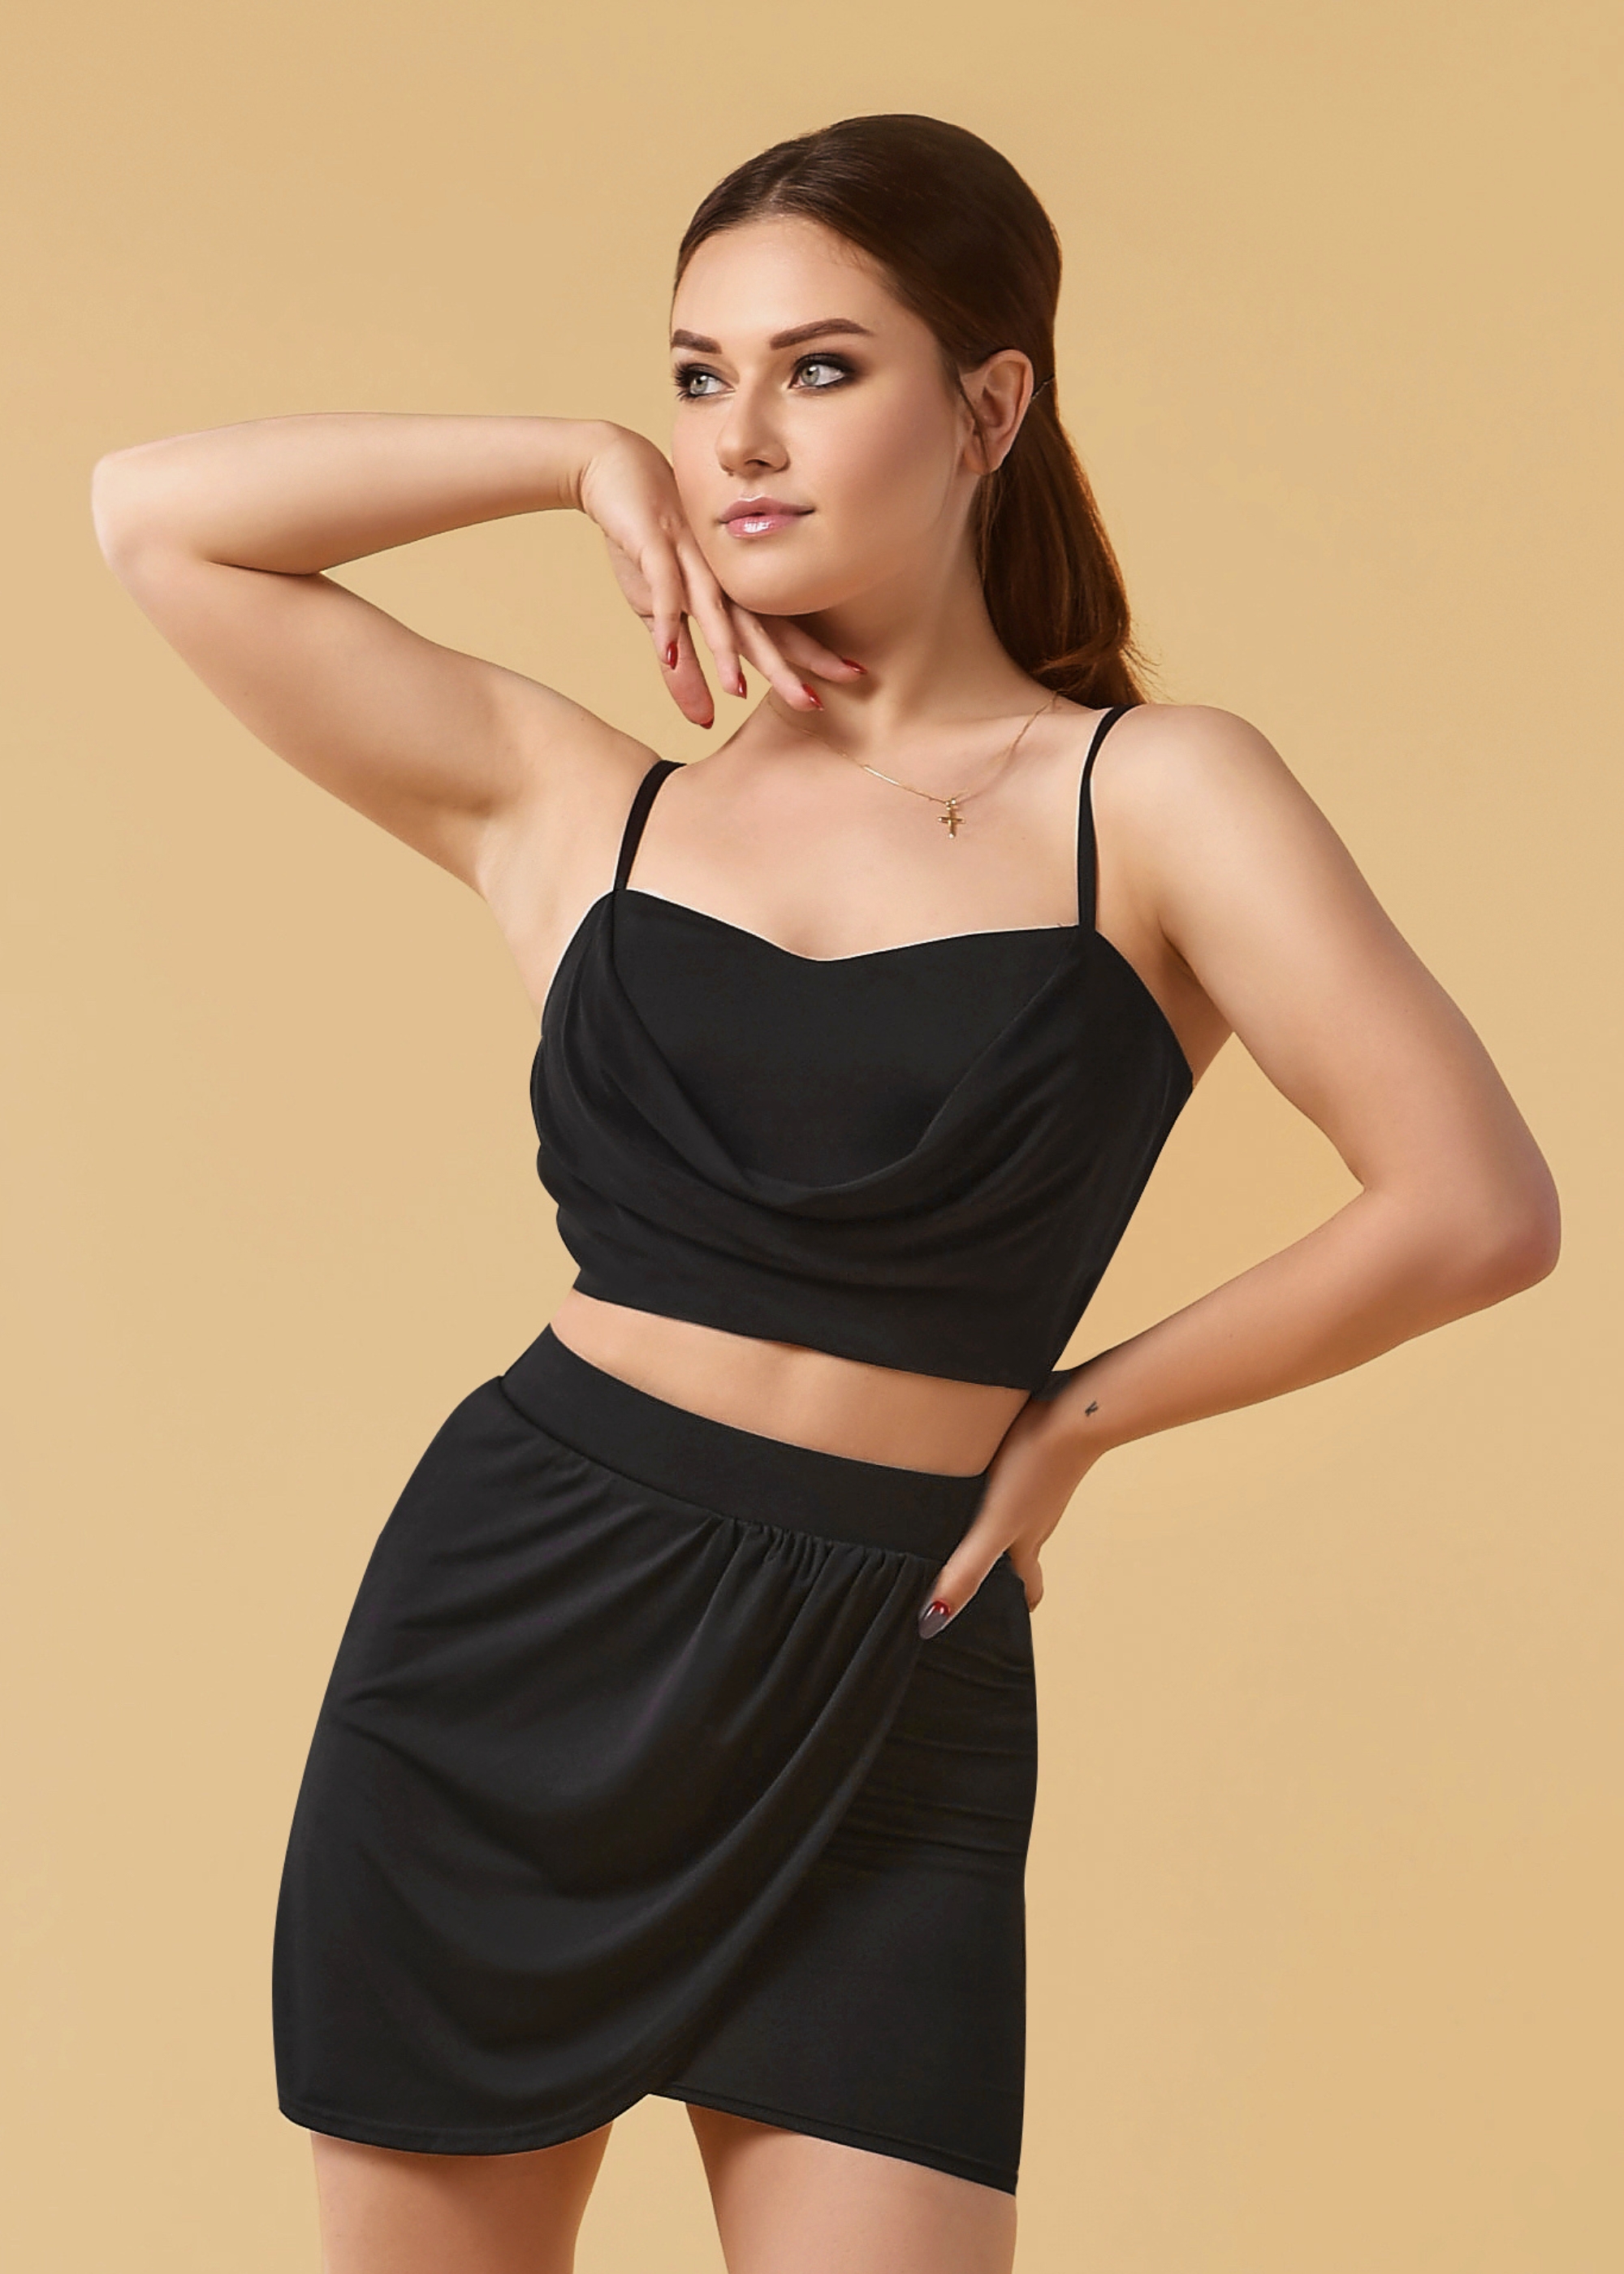 MELANY crop top by Grand Prix 